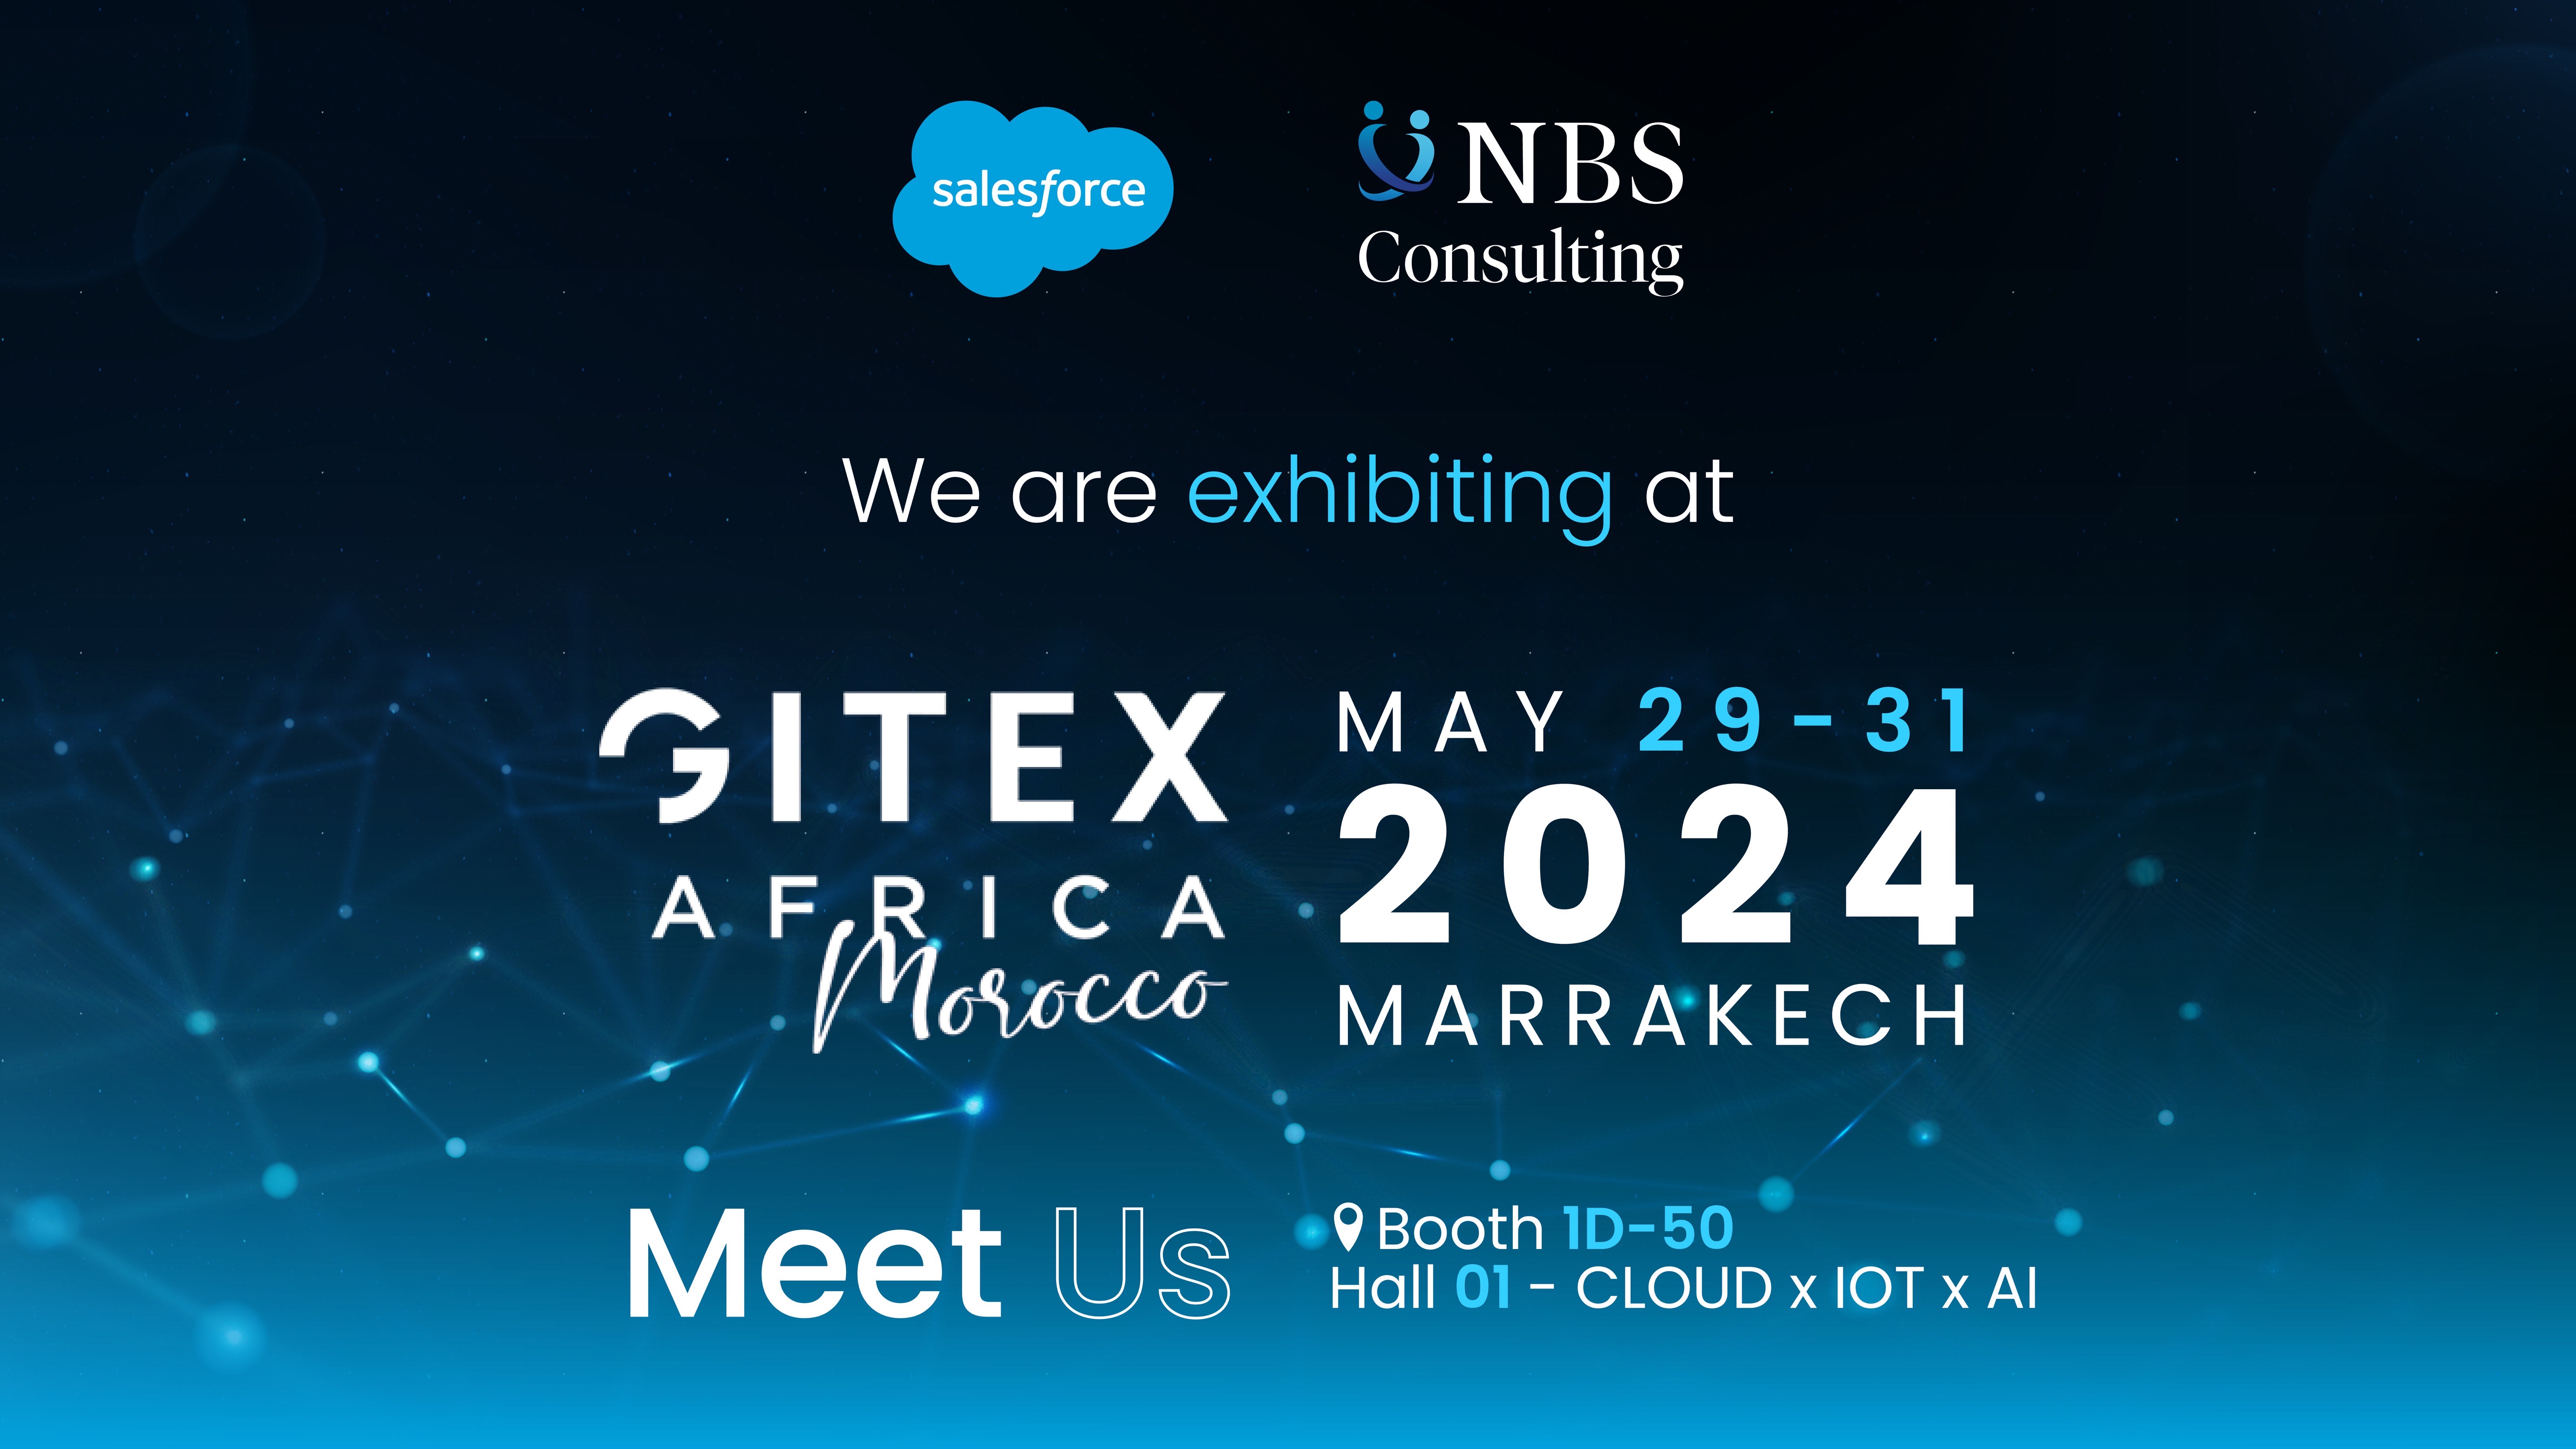 nbs consulting and salesforce are exhibiting at gitex africa 2024